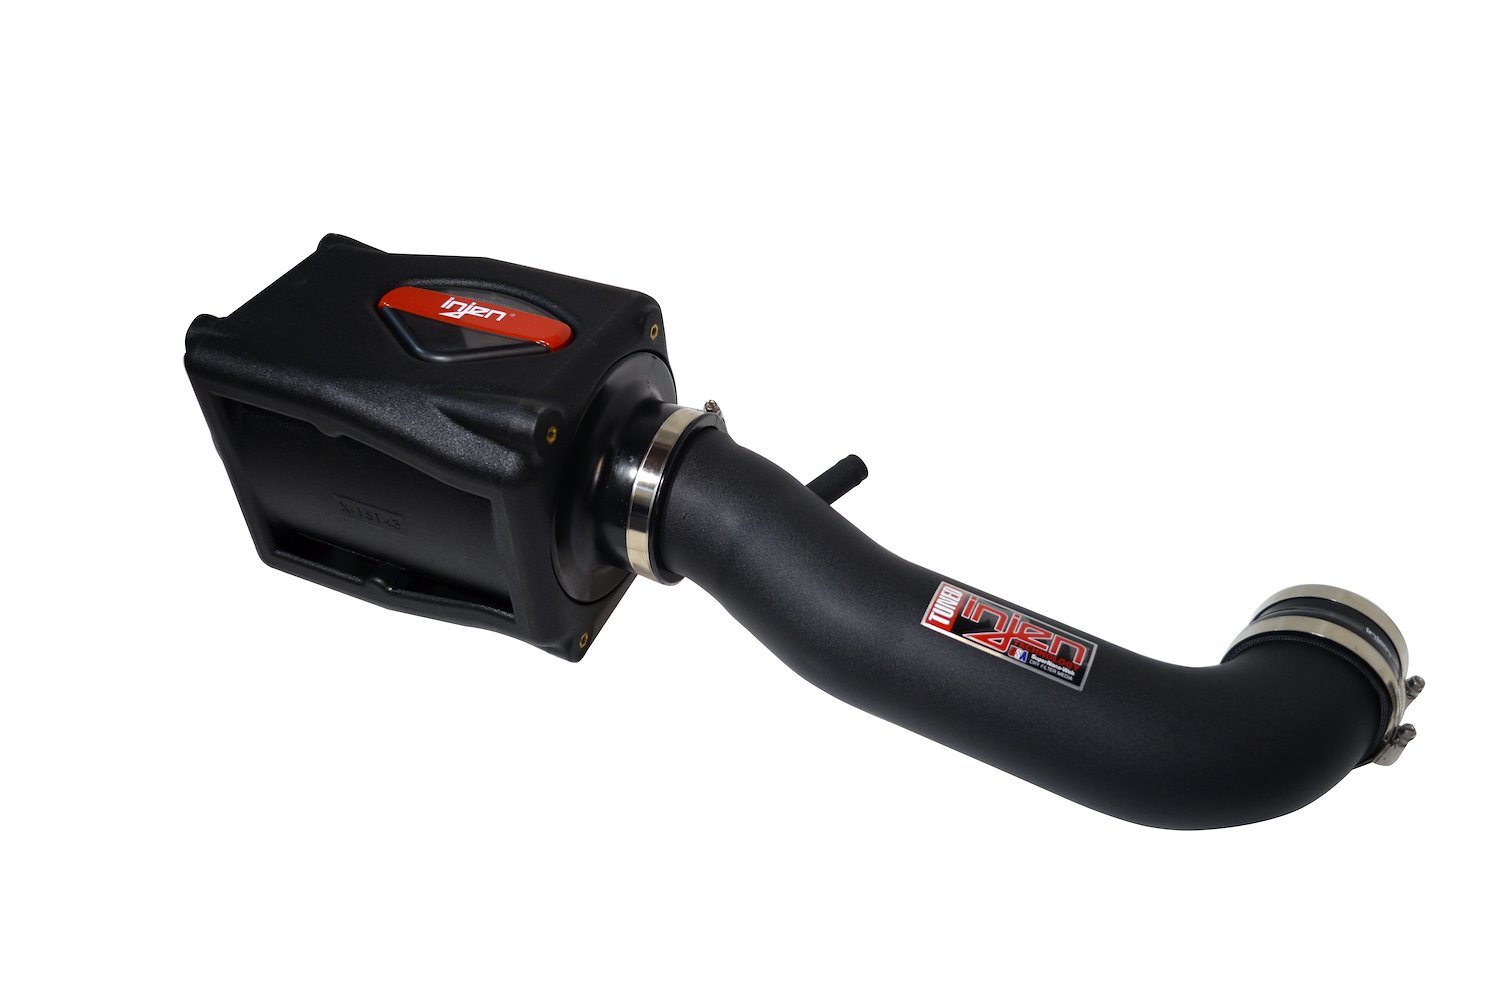 Wrinkle Black PF Cold Air Intake System w/ Rotomolded Air Filter Housing, 2012-2017 Jeep Wrangler 3.6L